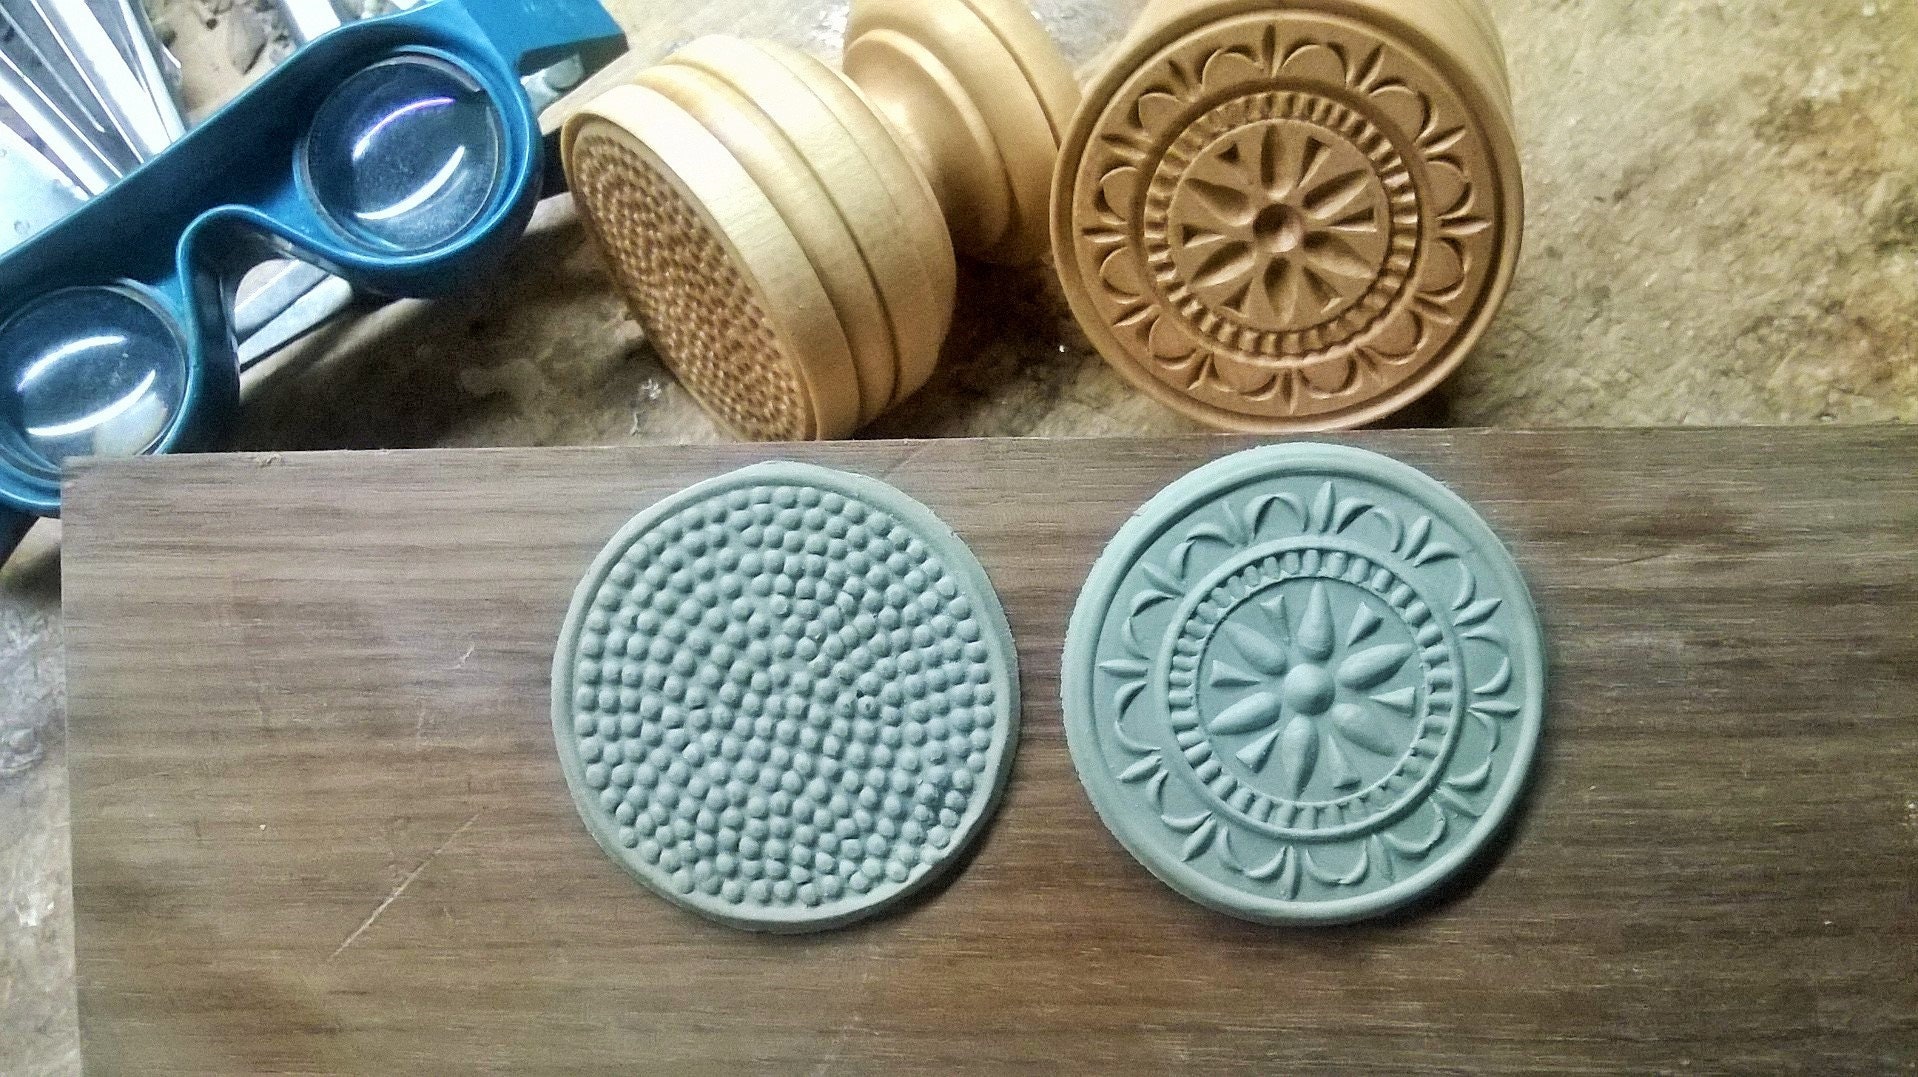 Buy CORZETTI PASTA Stamp: 4 Various Sets 1 Handle 1 or 2 or 3 or 4 Stamps  Handturned, Handcarved, in Maple of Chiantishire Online in India 